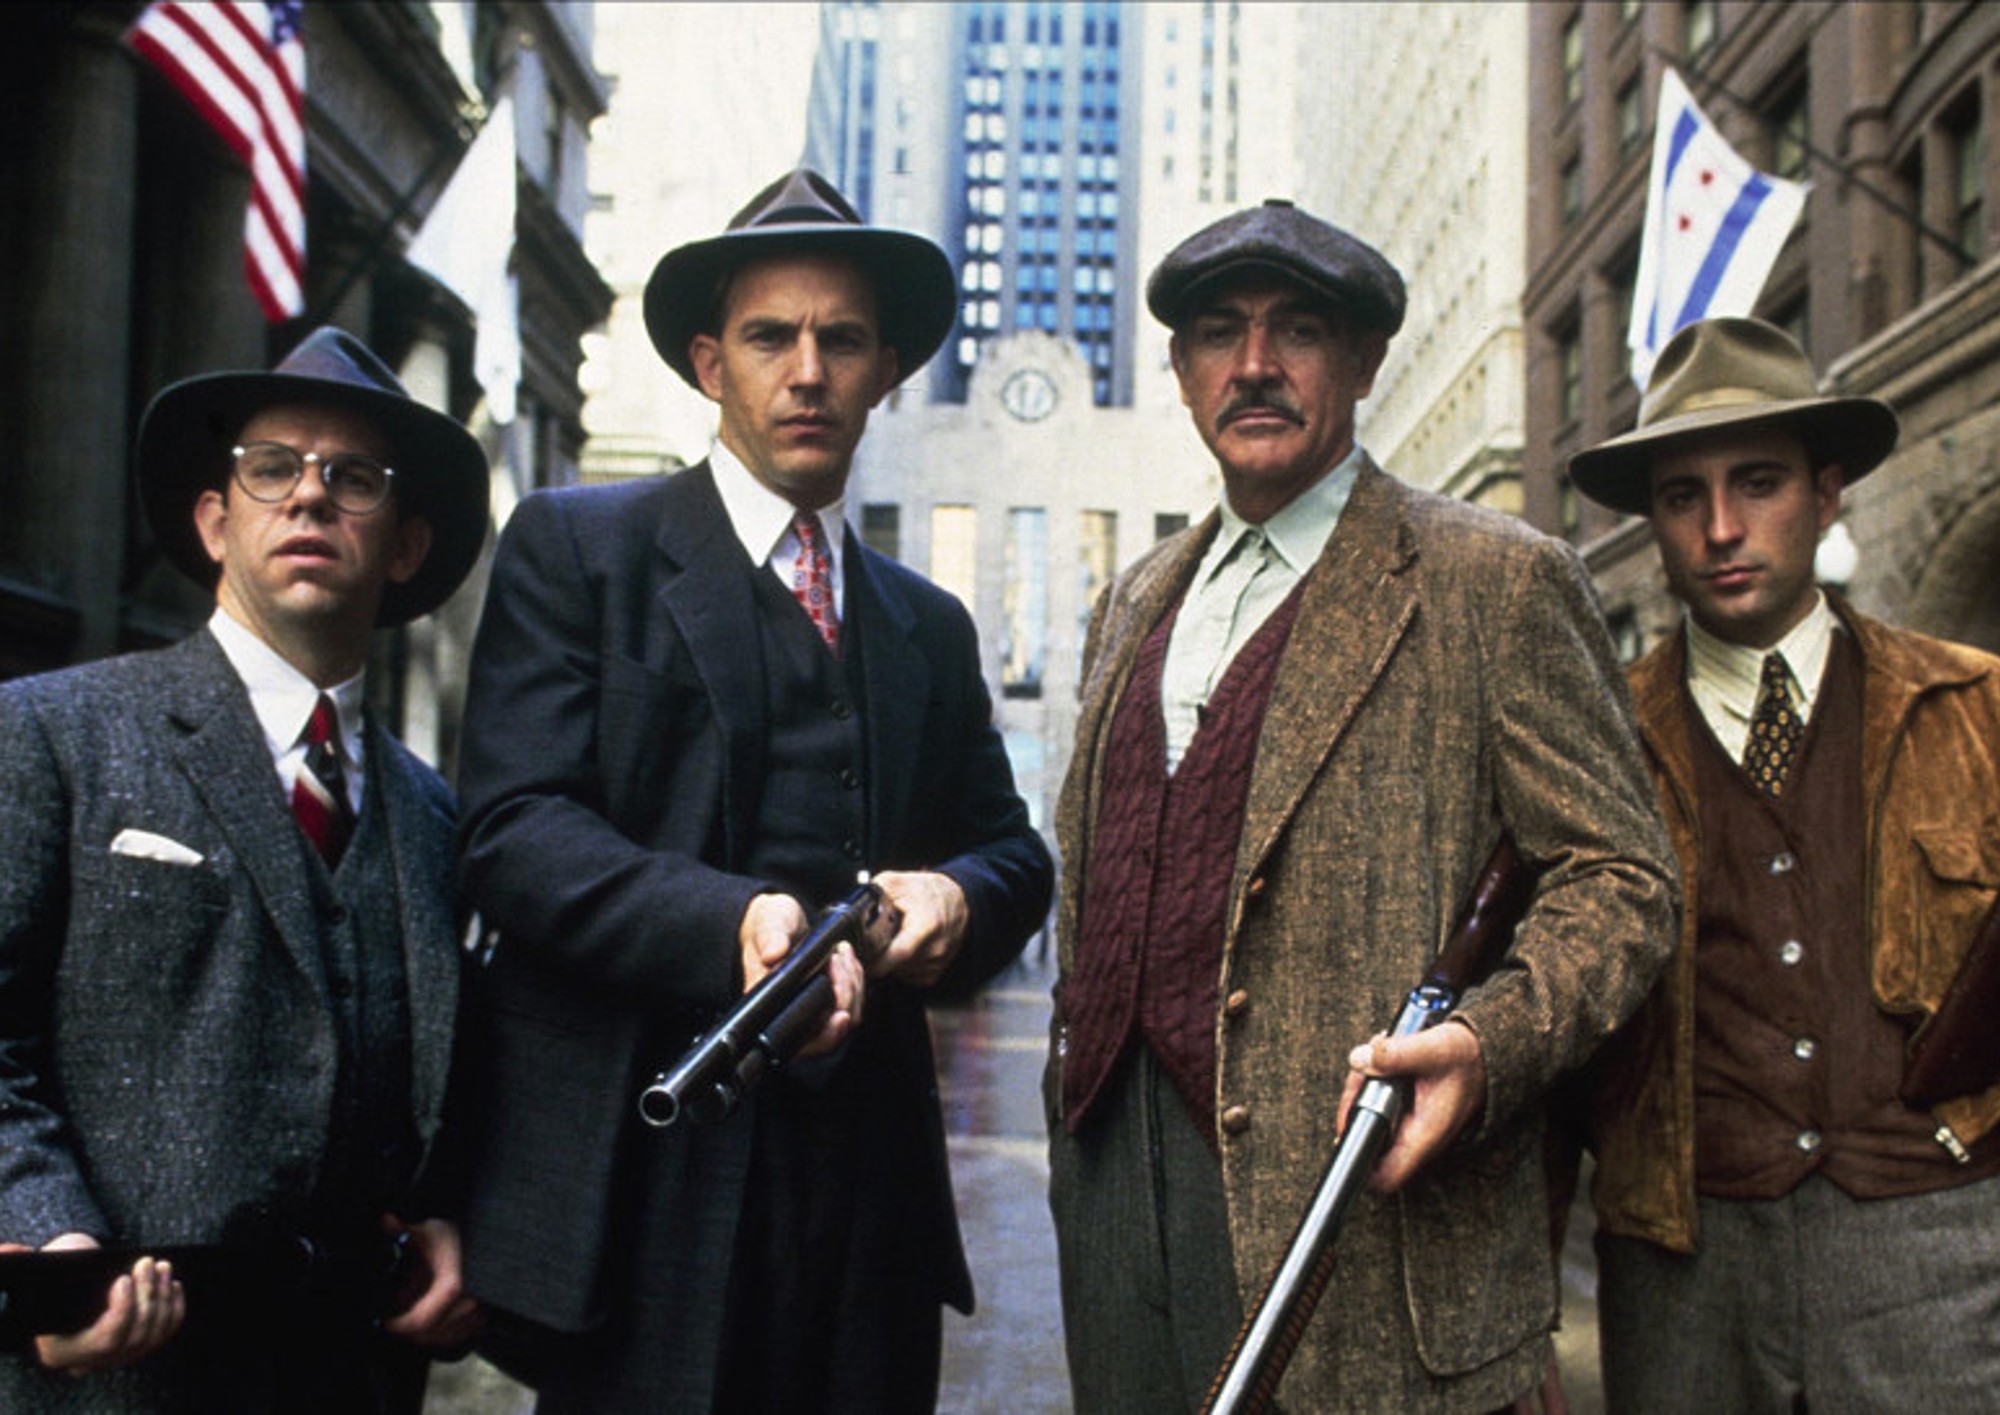 Image from the motion picture The Untouchables